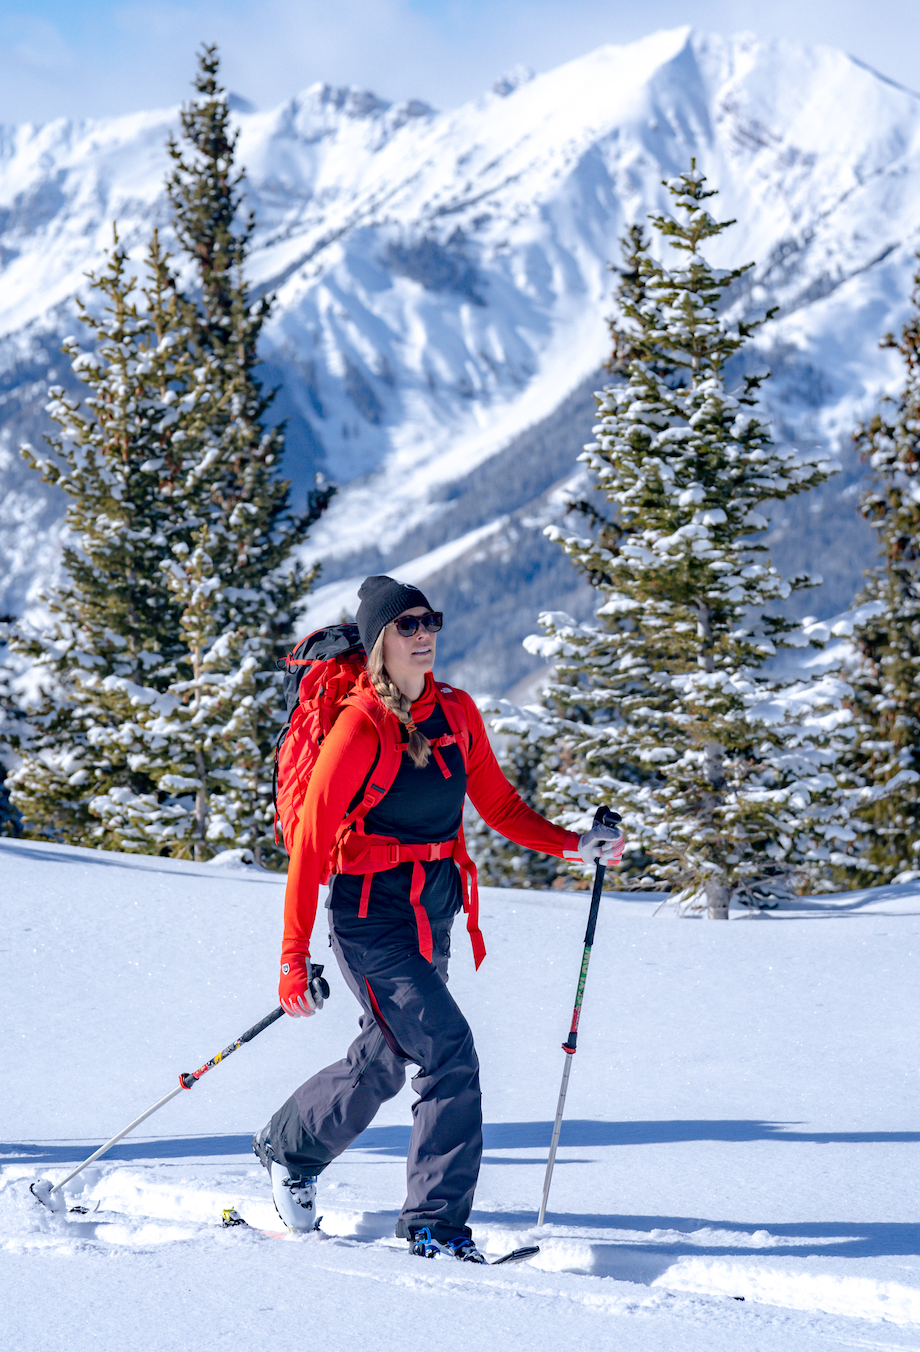 New To Backcountry? Here’s What You Need to Know